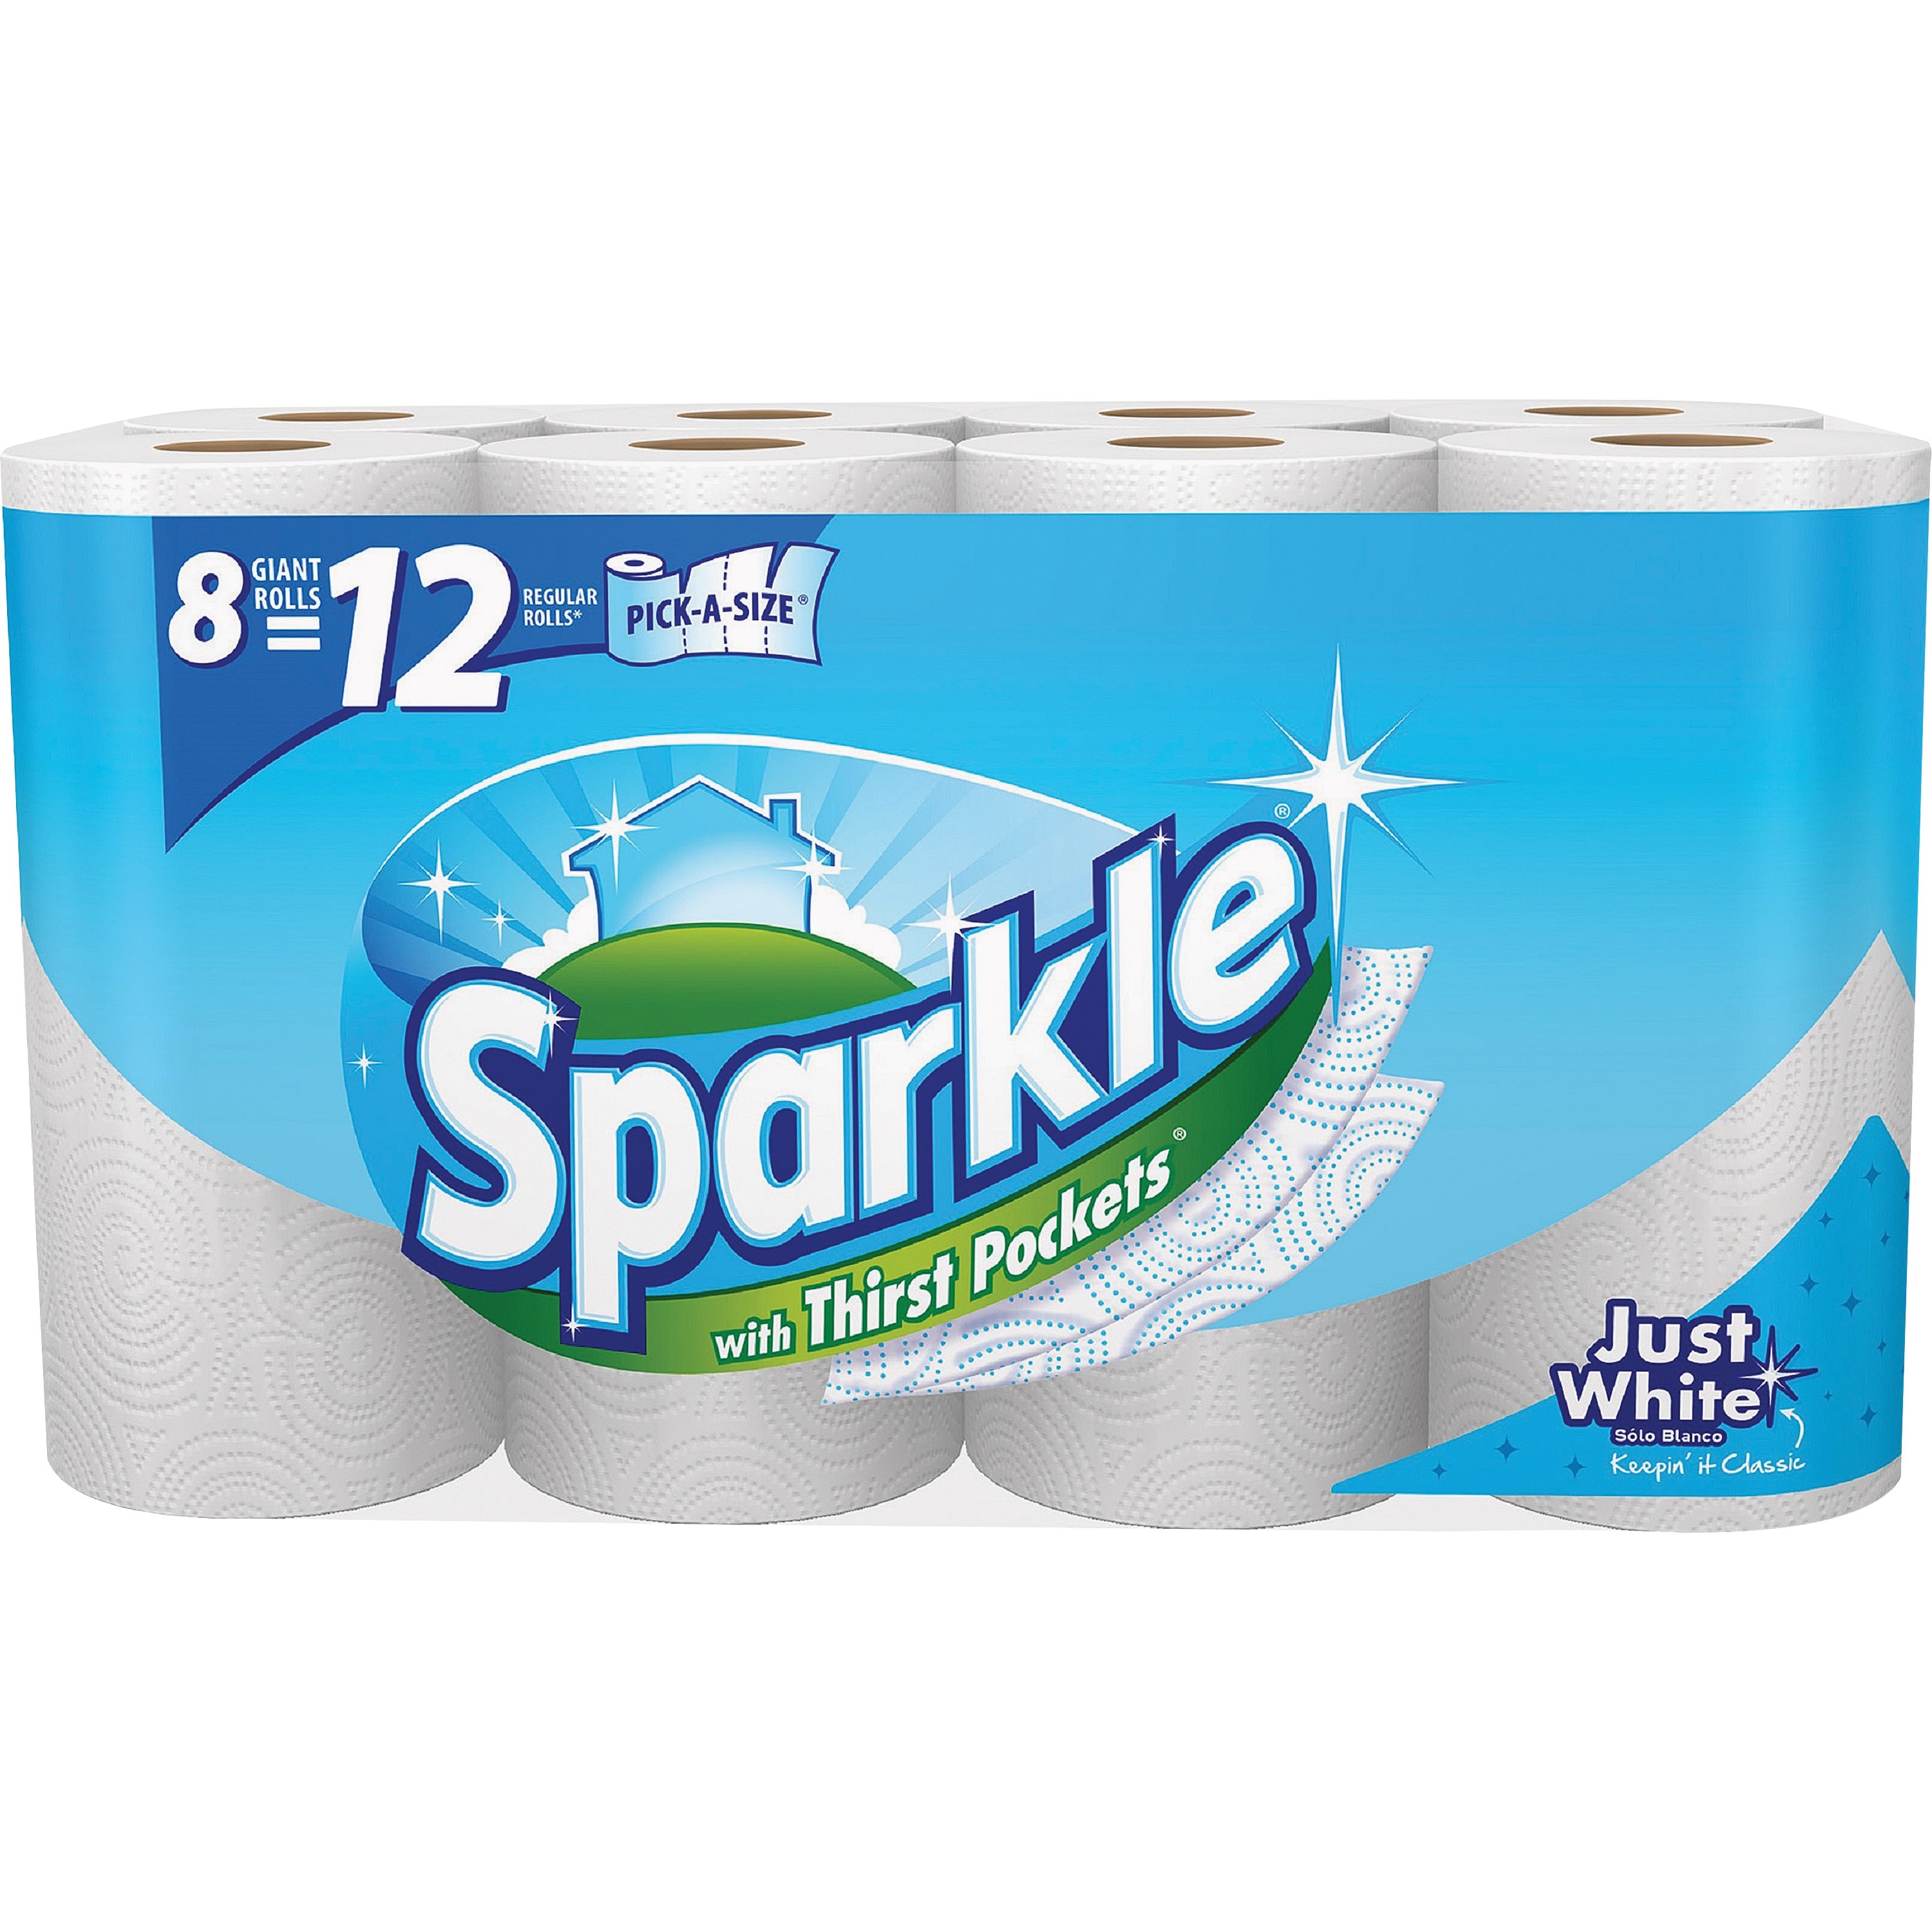 Sparkle Paper Towels, Pick-A-Size, 8 Giant Rolls - image 1 of 7